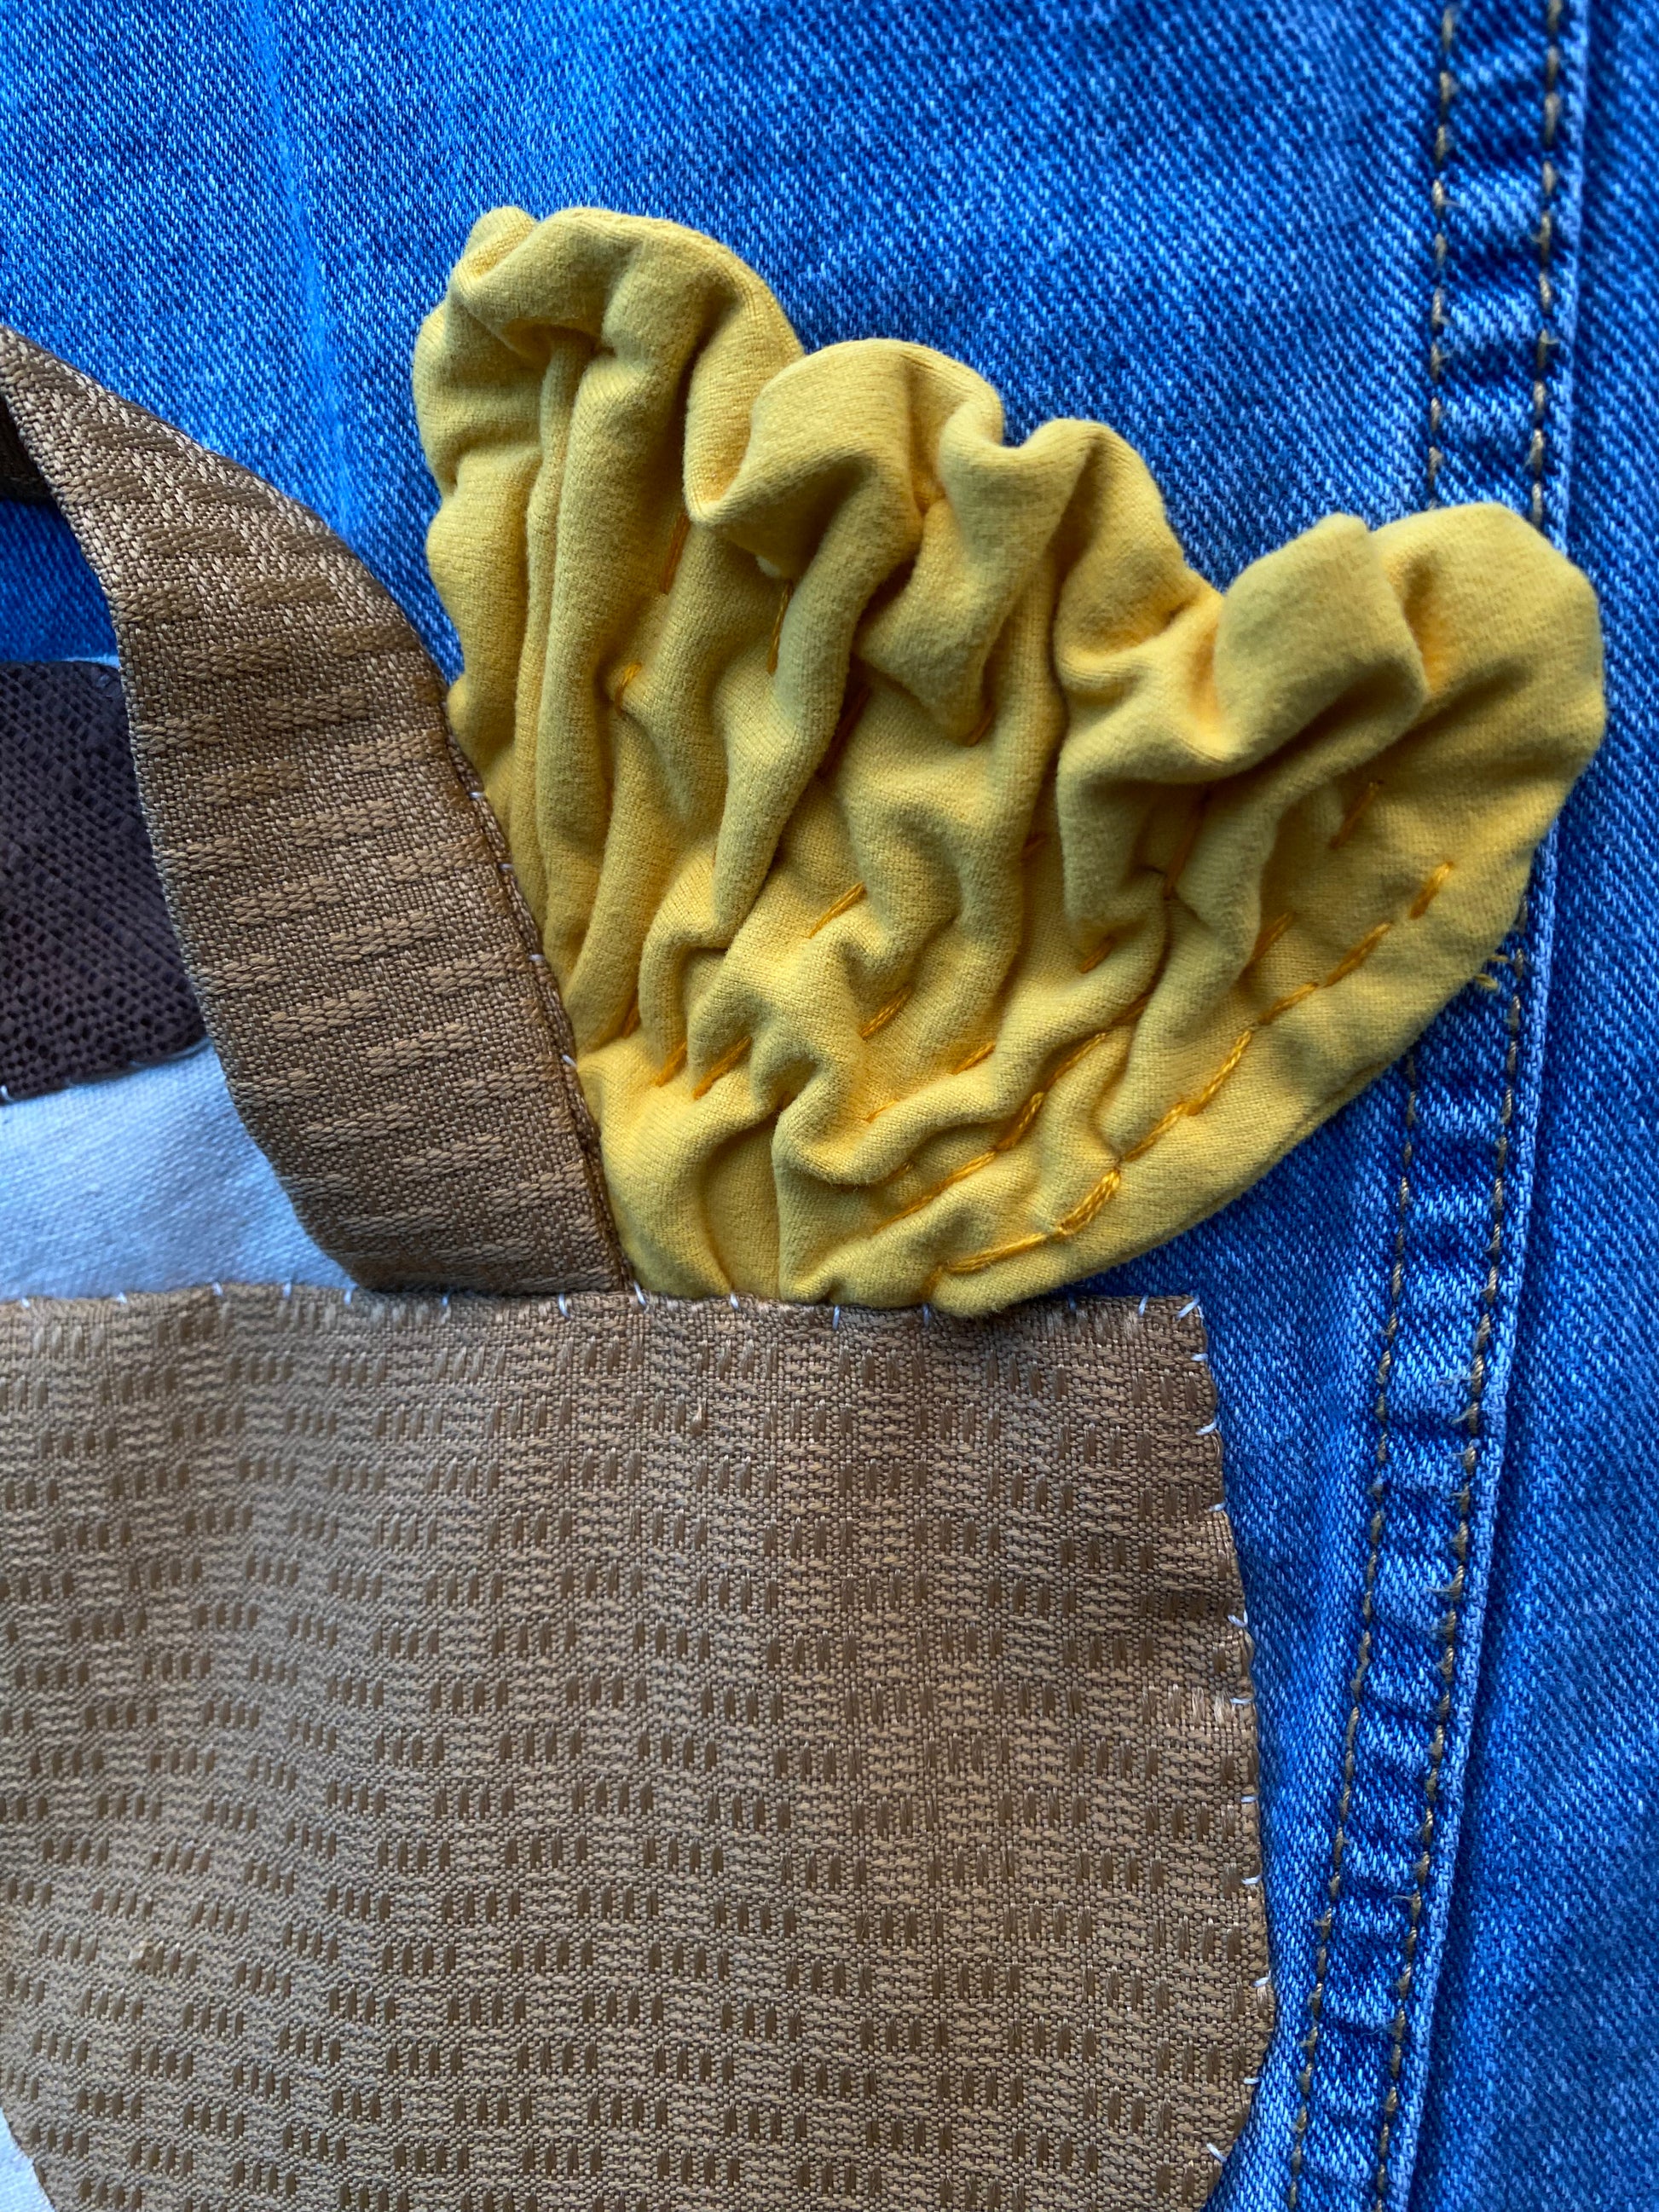 Denim jacket with hand sewn porcini and chanterelle